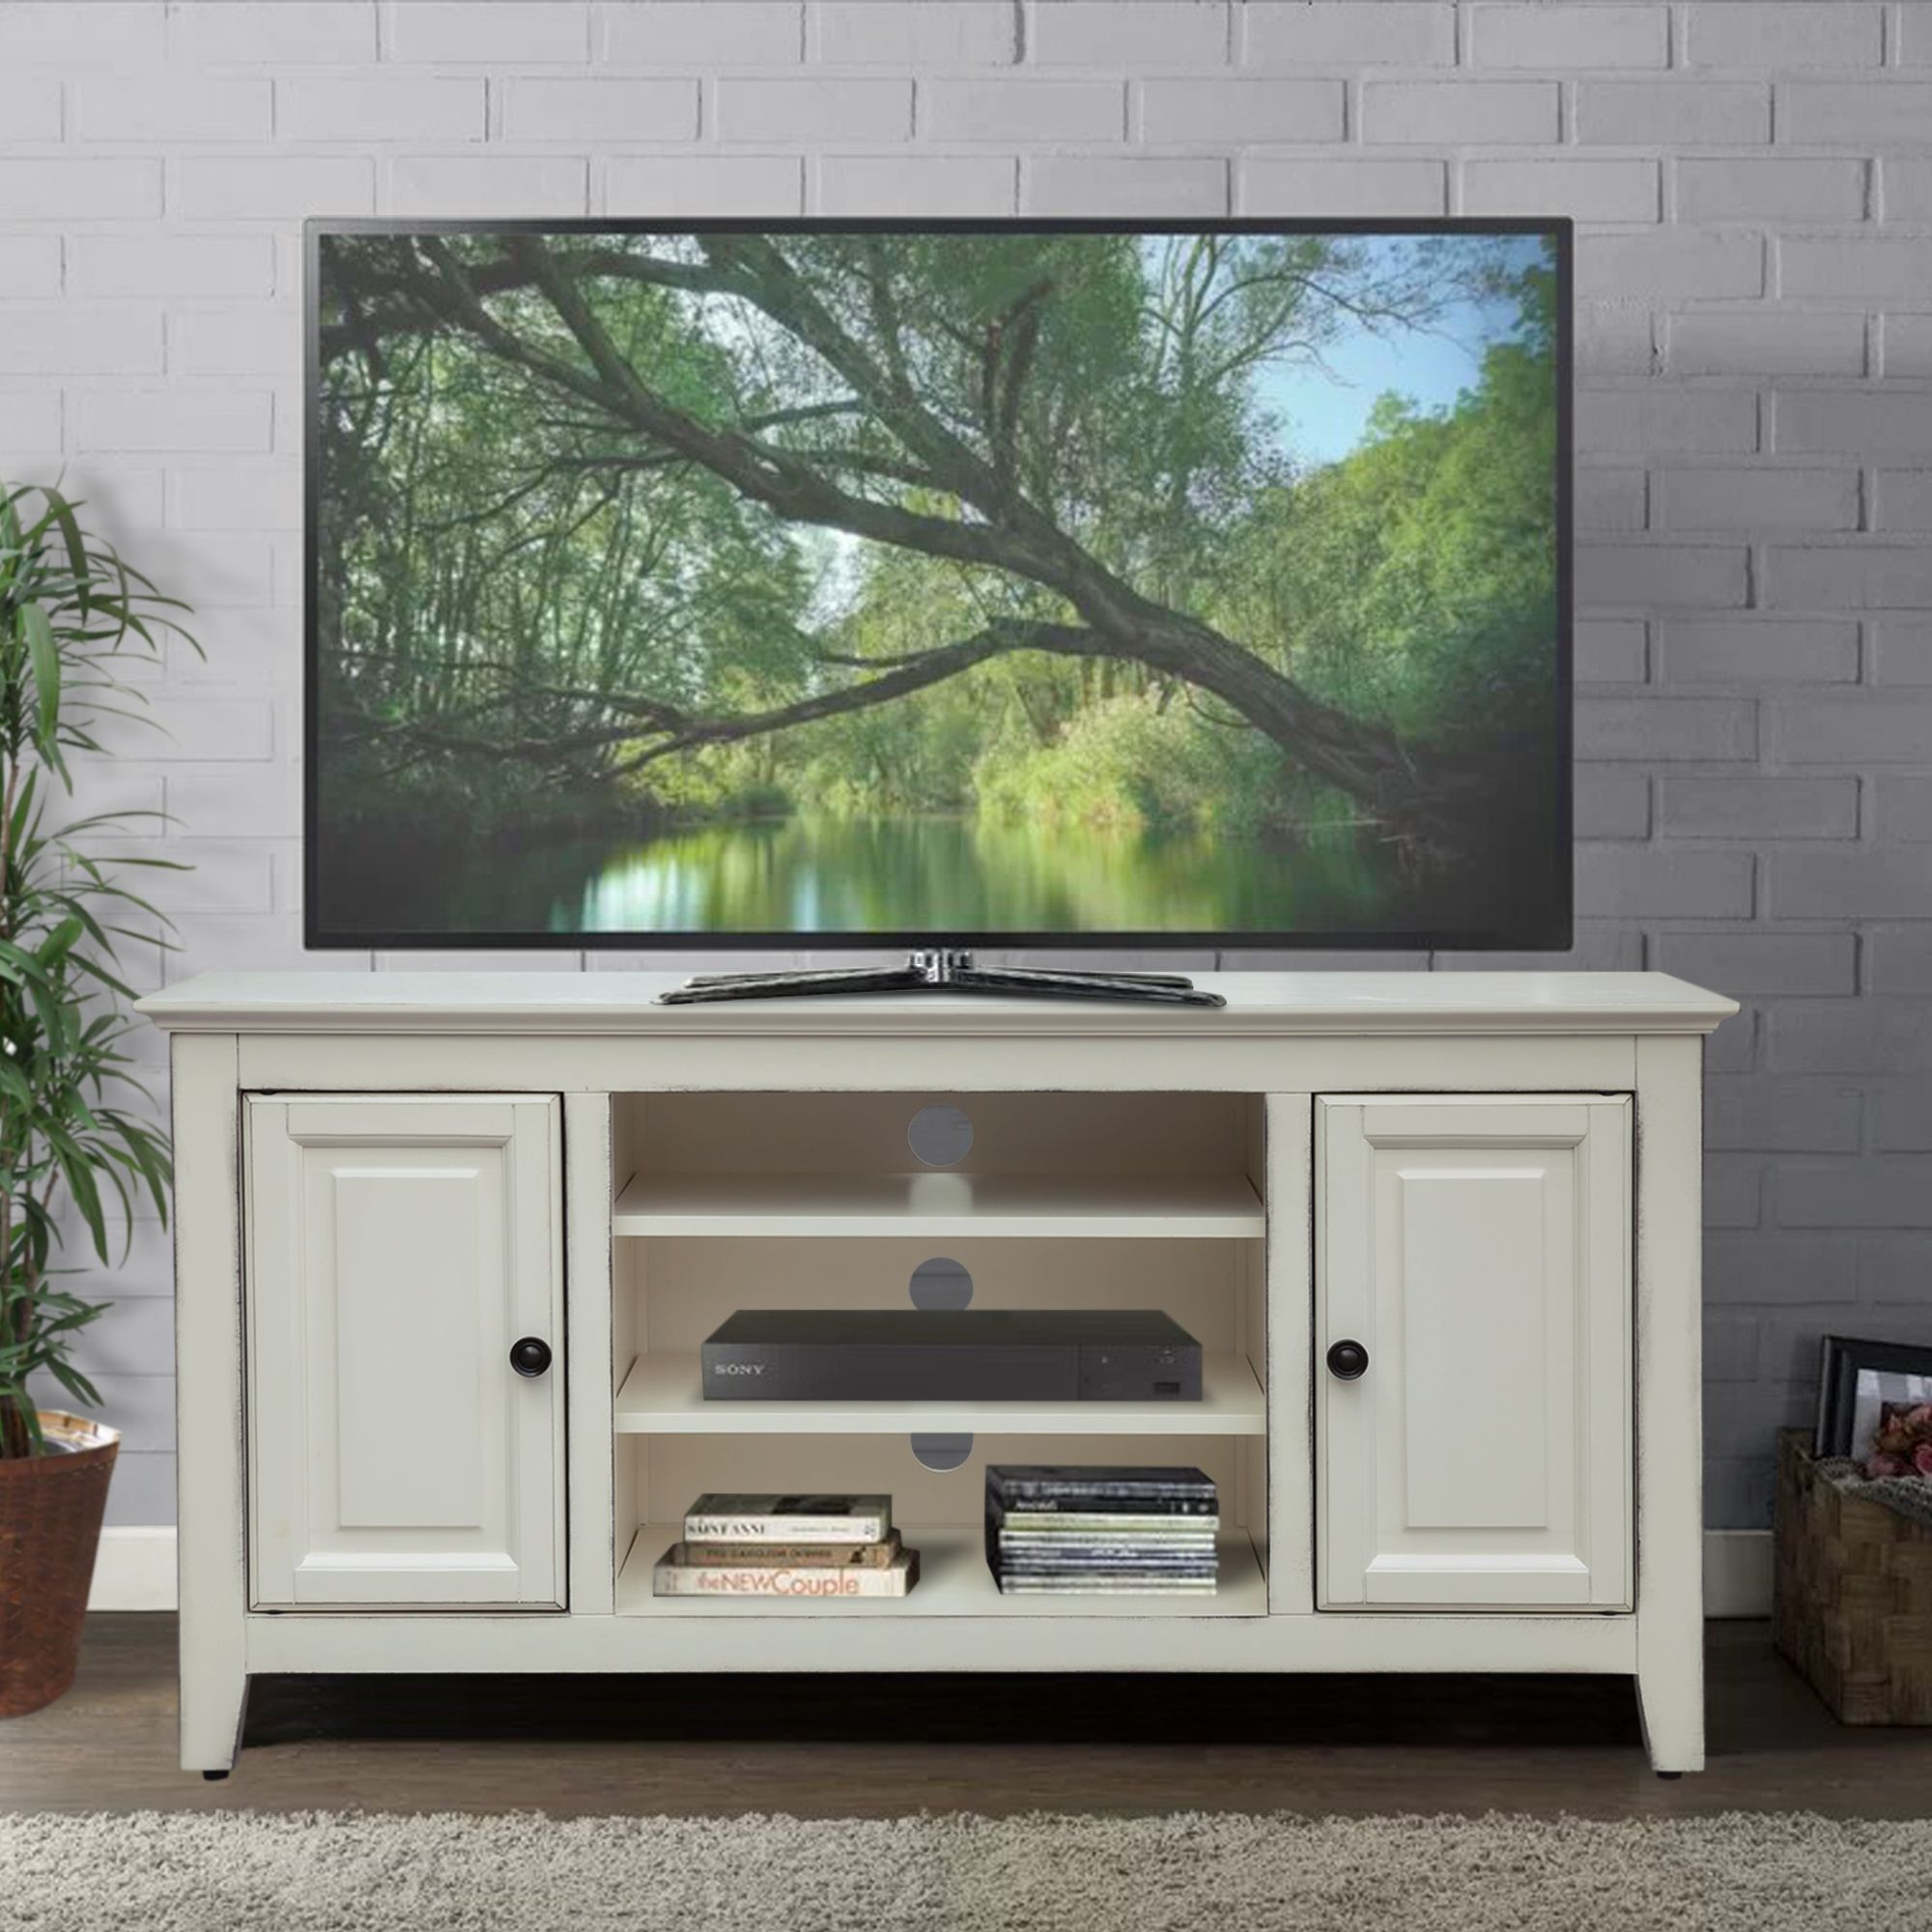 48" Wood Grain Tv Stand In Antique White – Walmart Throughout White Tv Stands (View 2 of 15)